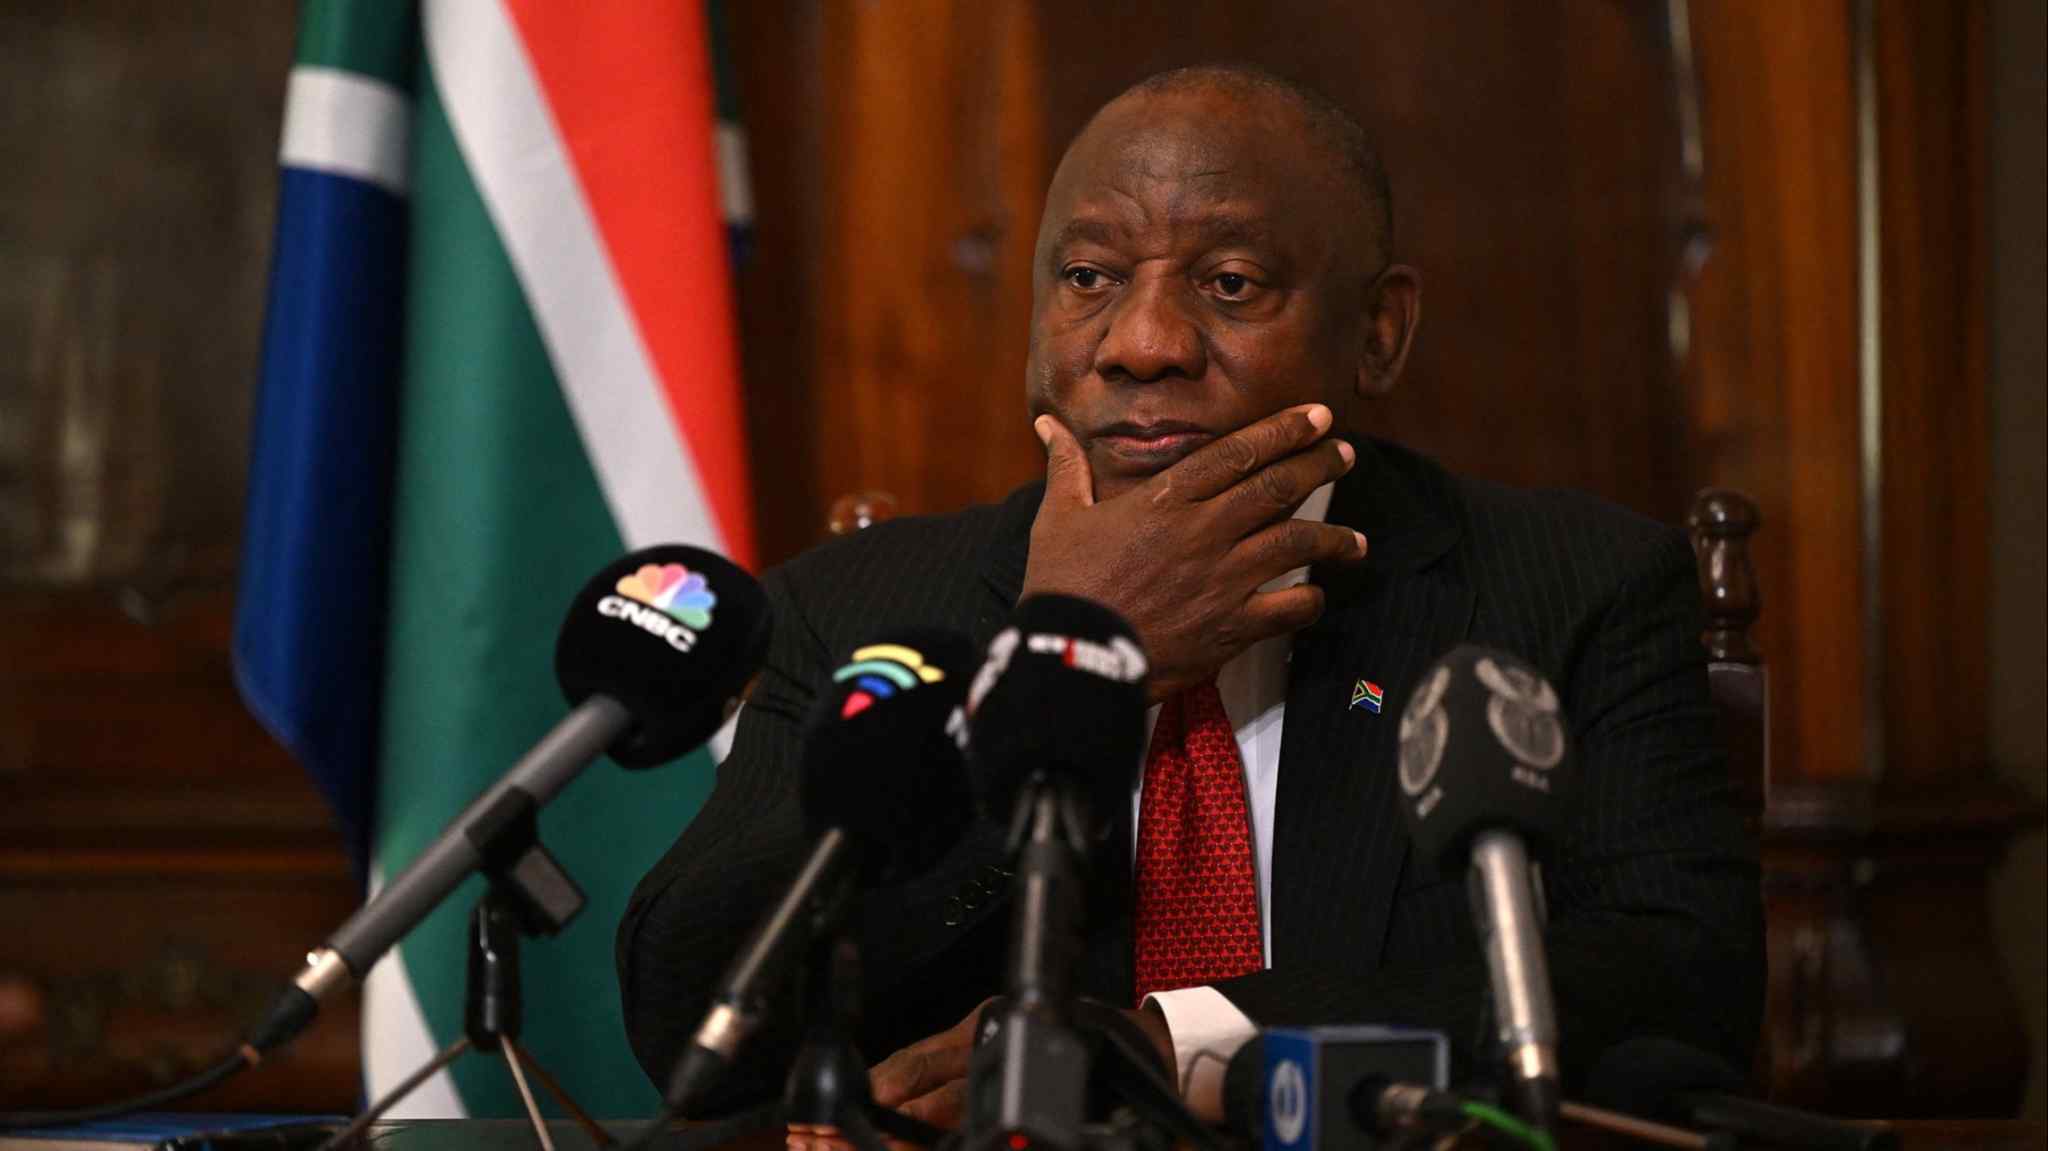 Ramaphosa presidency under threat after panel finds he ‘abused position’